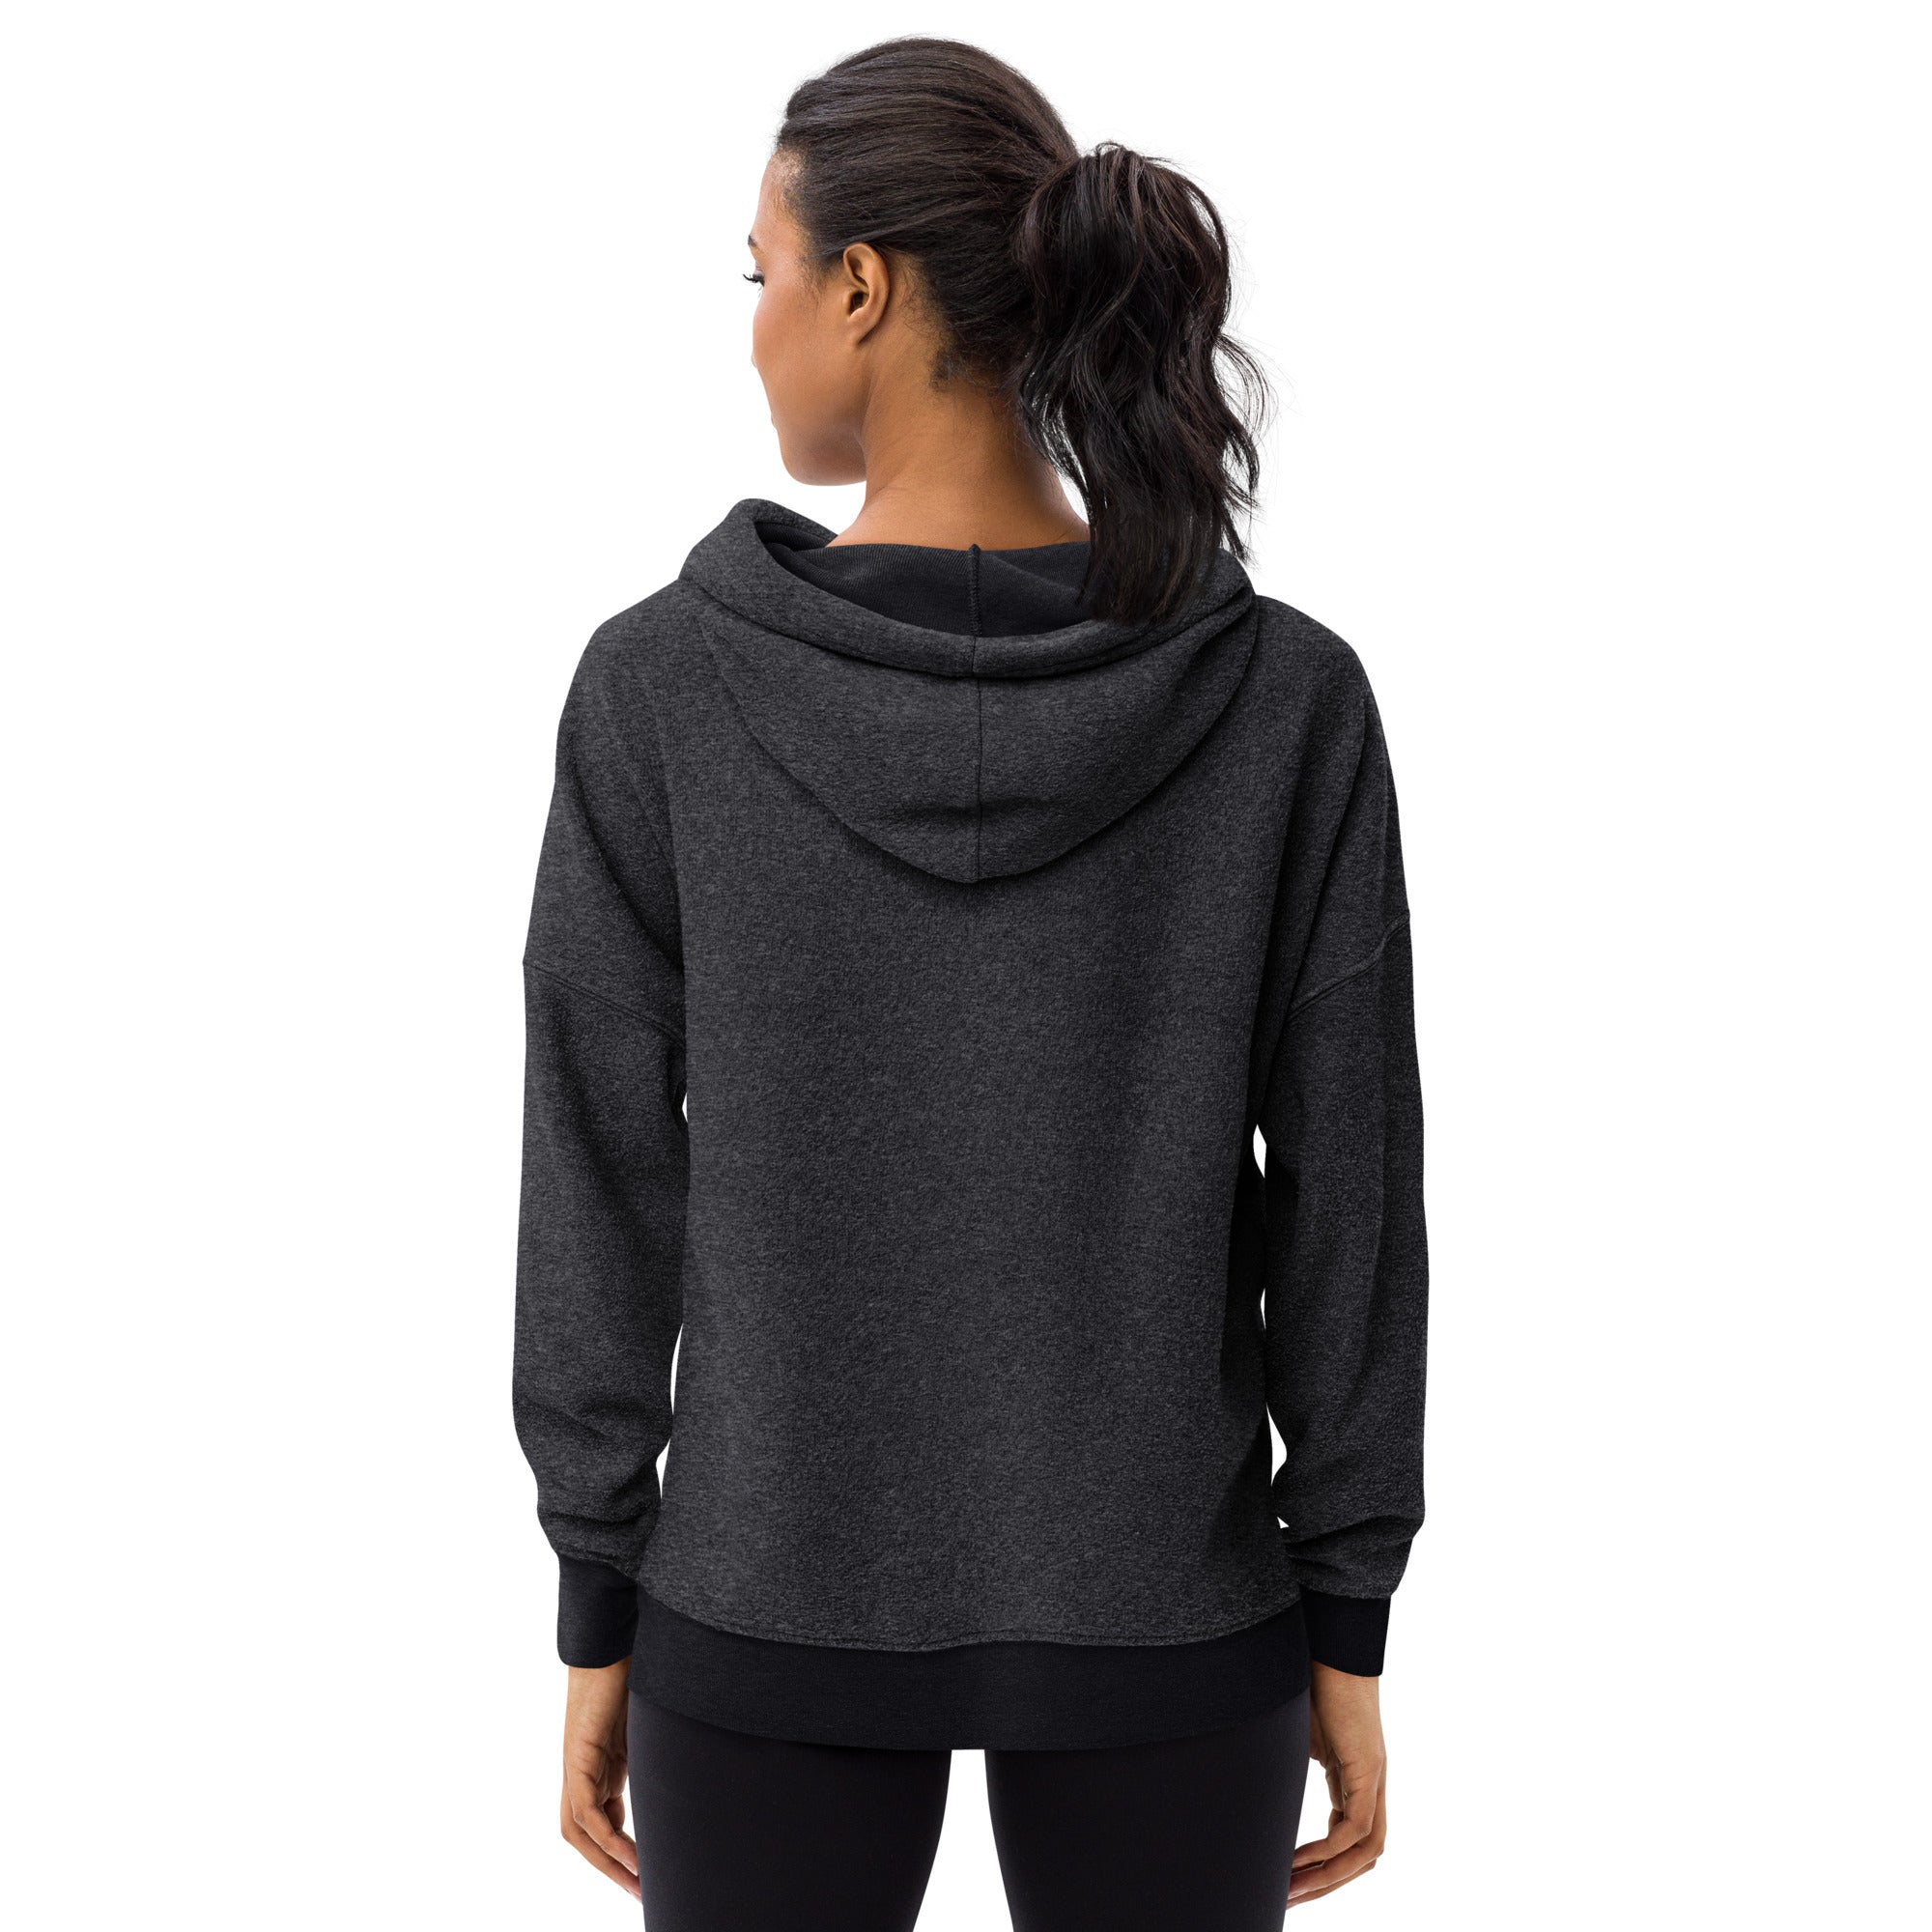 RFG Unisex sueded fleece hoodie Repton Fitness and Boxing Gears